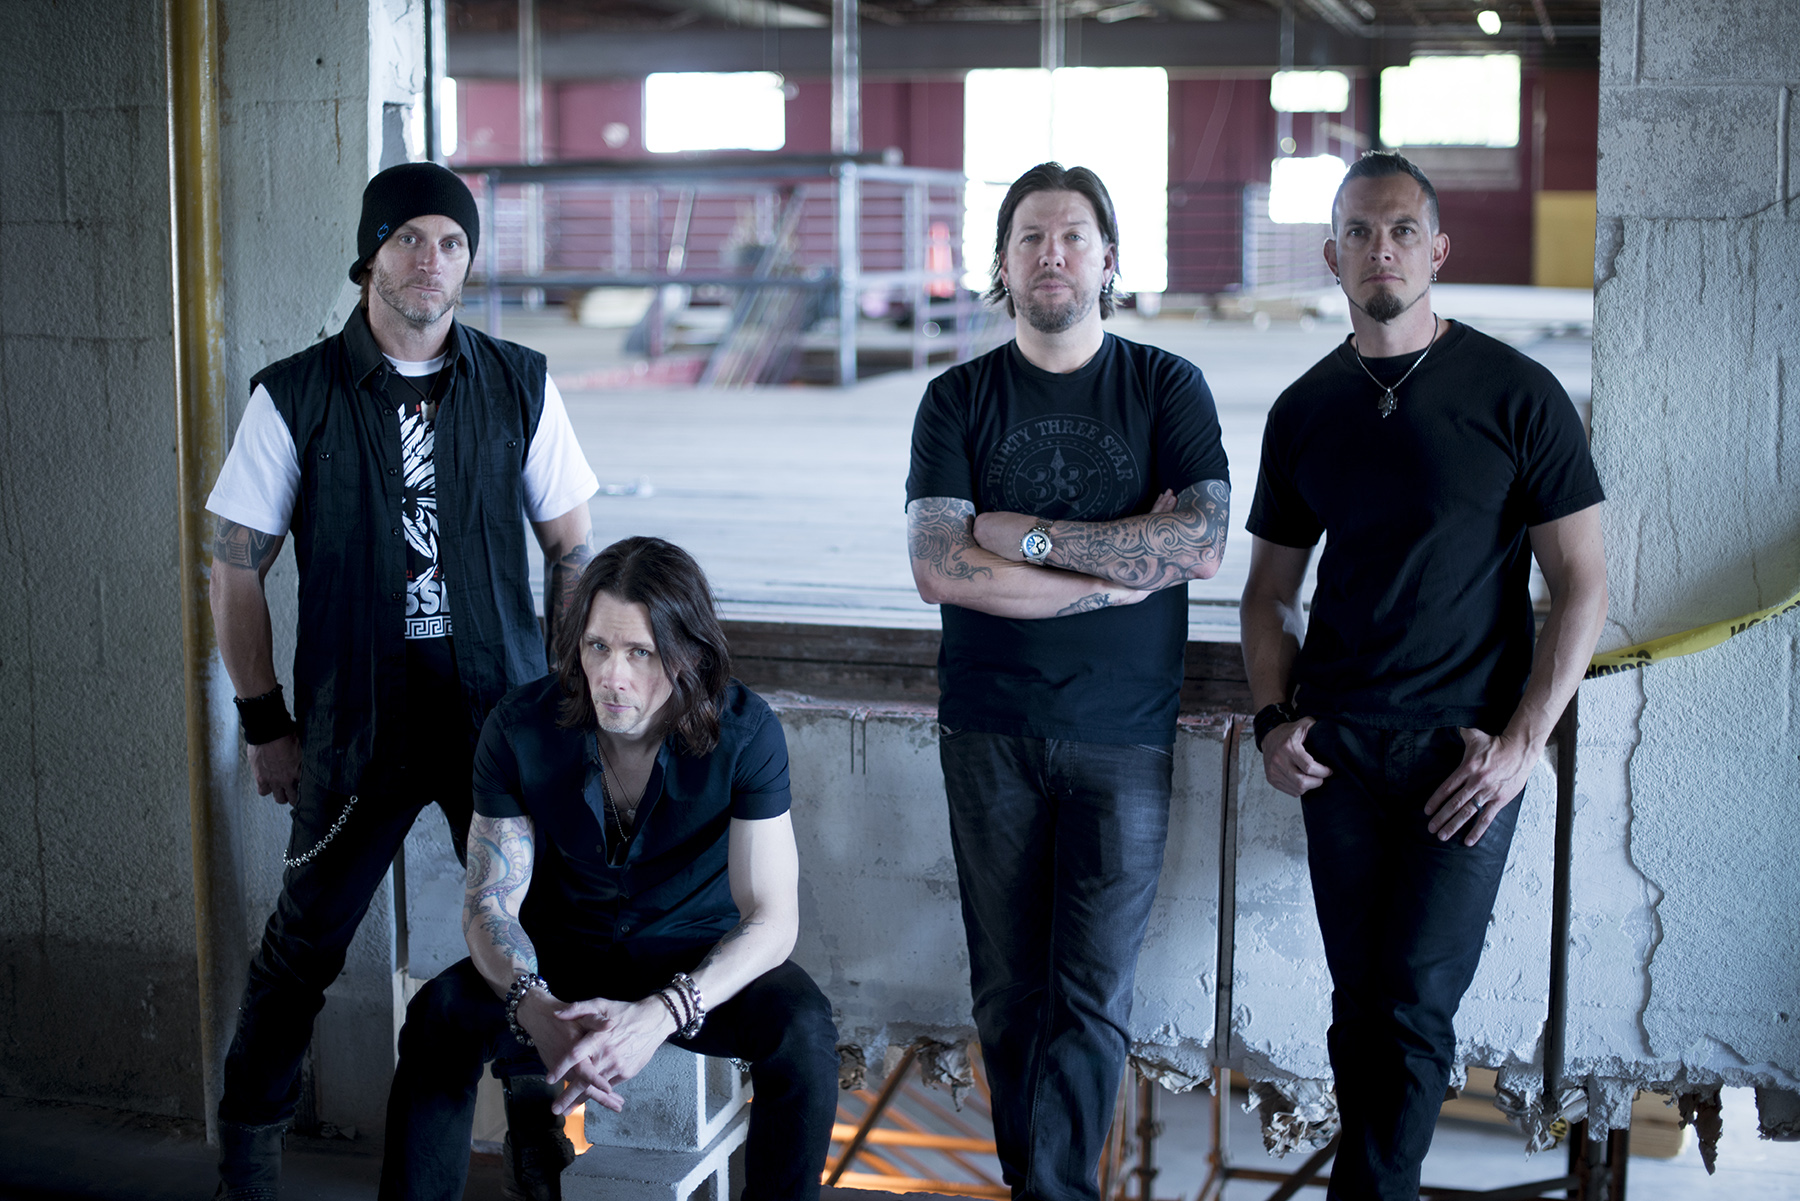 Alter Bridge will perform at the Sturgis Buffalo Chip Friday, Aug. 11